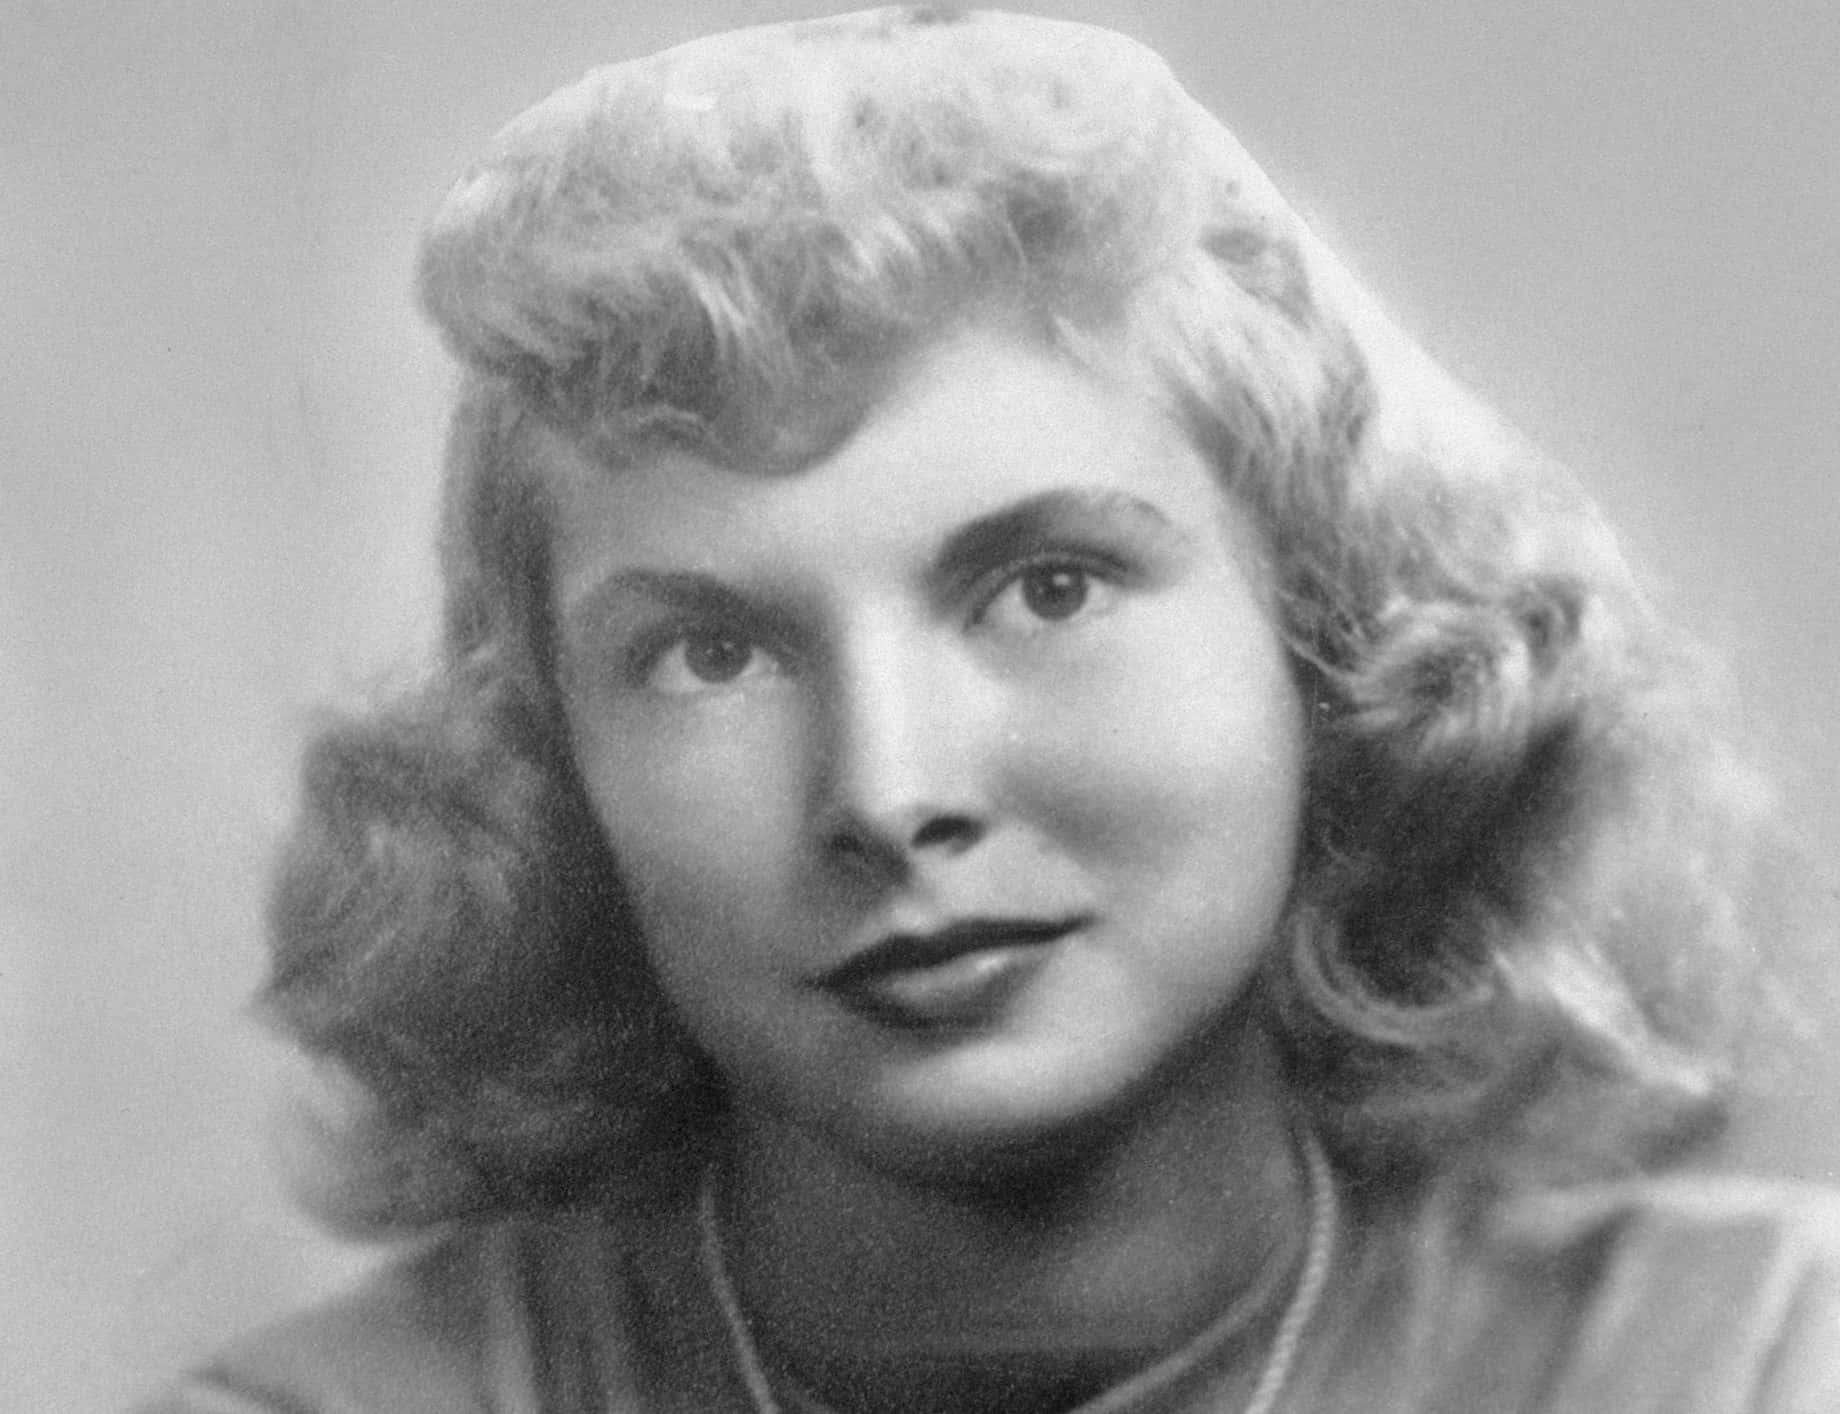 Janet leigh Stock Photos, Royalty Free Janet leigh Images